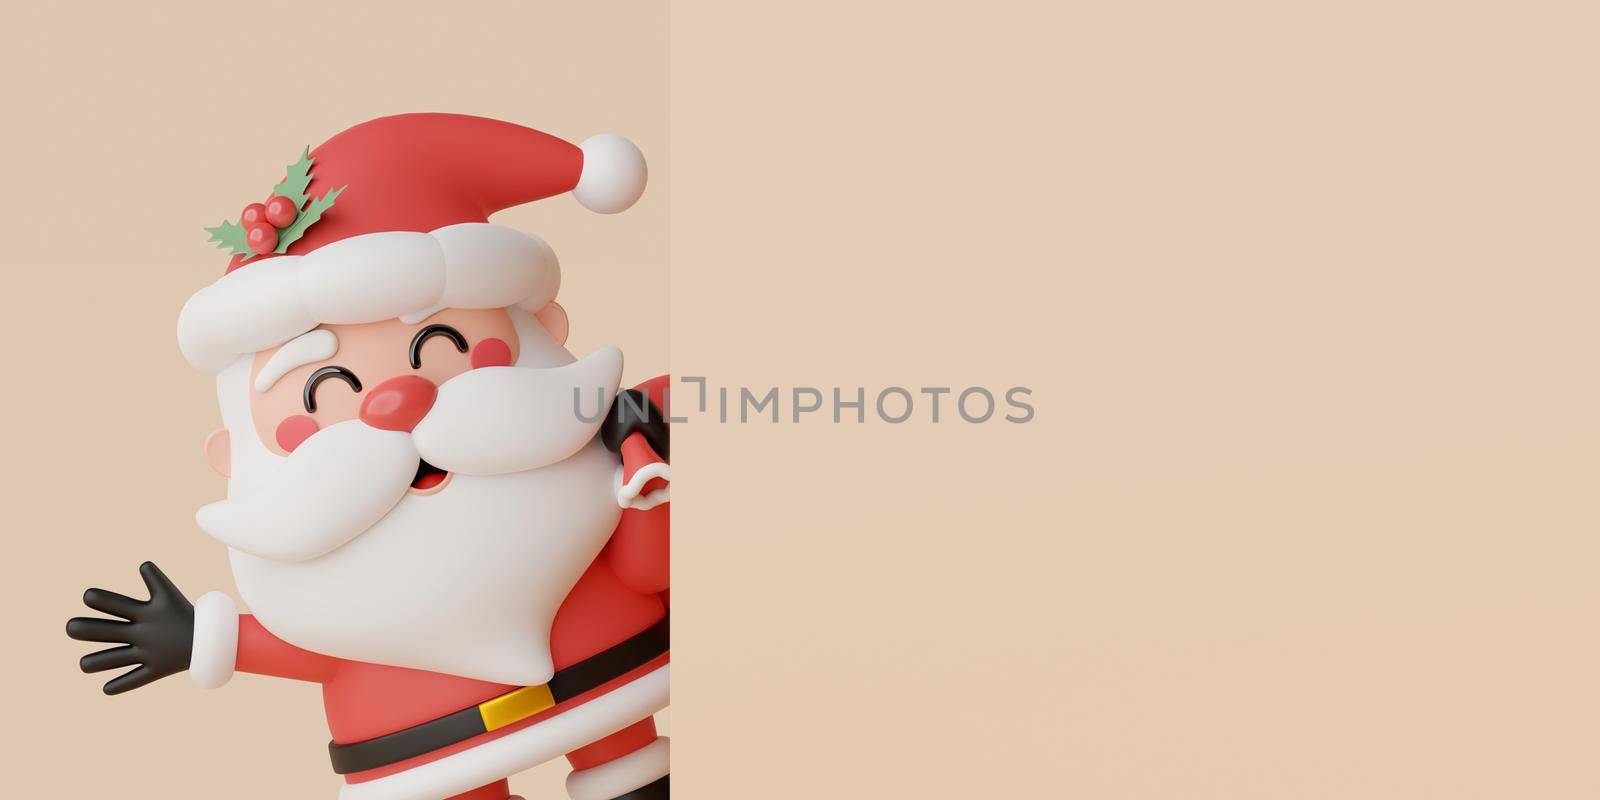 3d illustration banner of Santa Claus with copy space for text or advertisement by nutzchotwarut